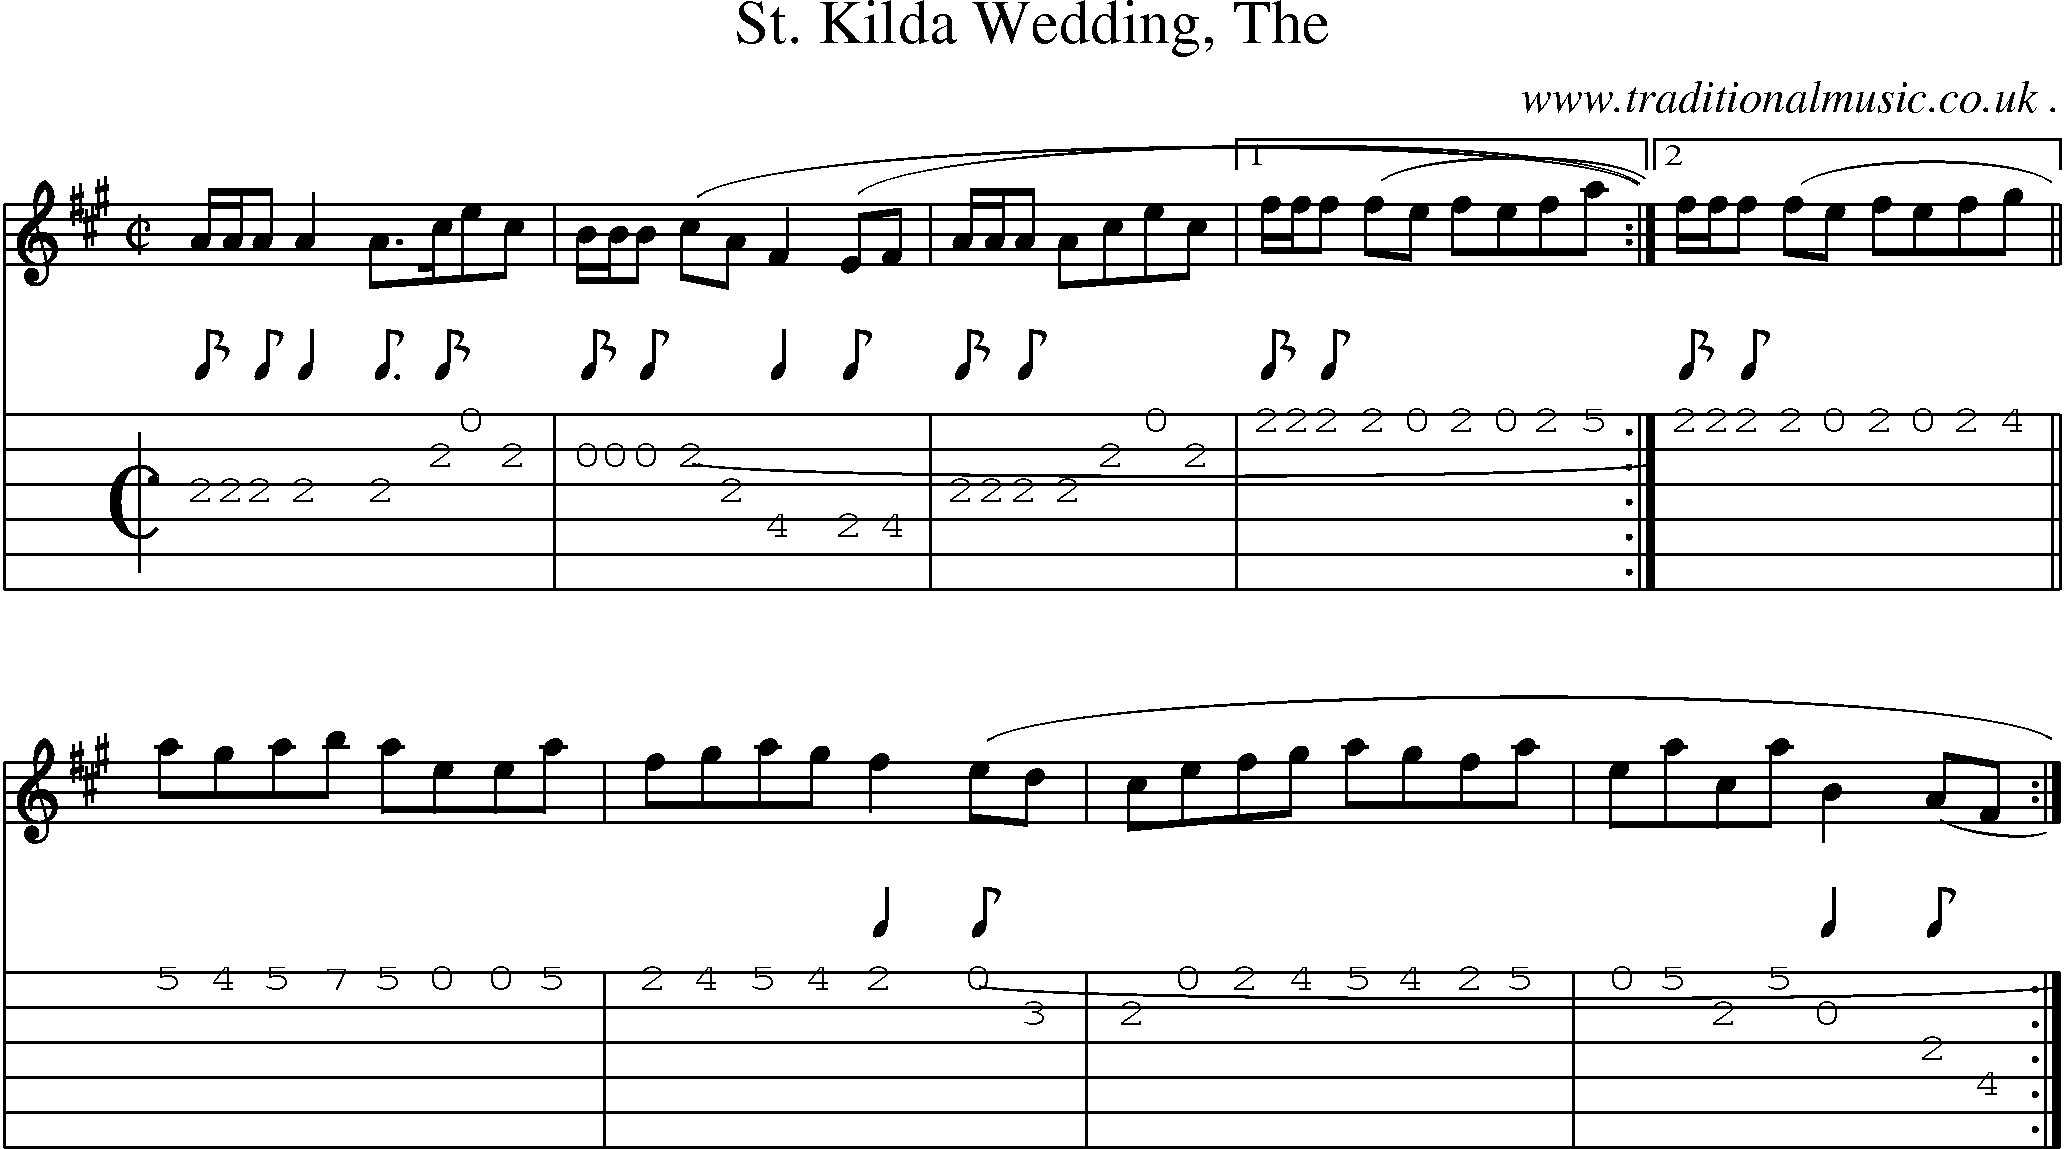 Sheet-music  score, Chords and Guitar Tabs for St Kilda Wedding The